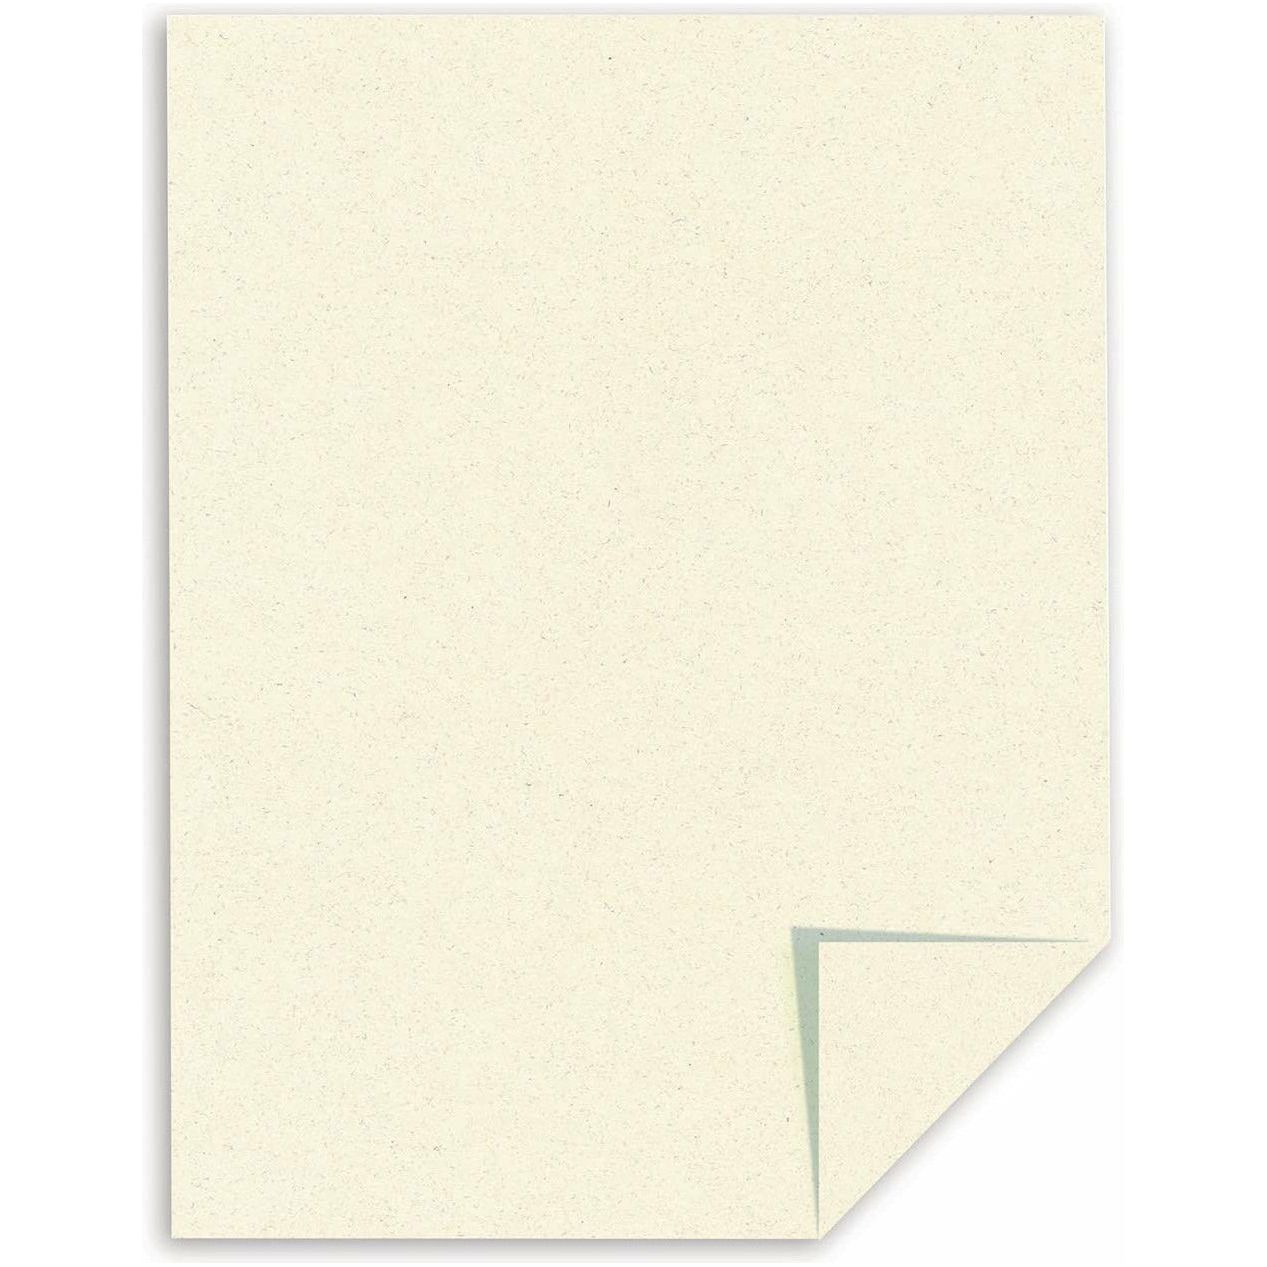 Southworth Fine Granite Paper 90g Off-White Watermarked A4 - Pack of 8 ...